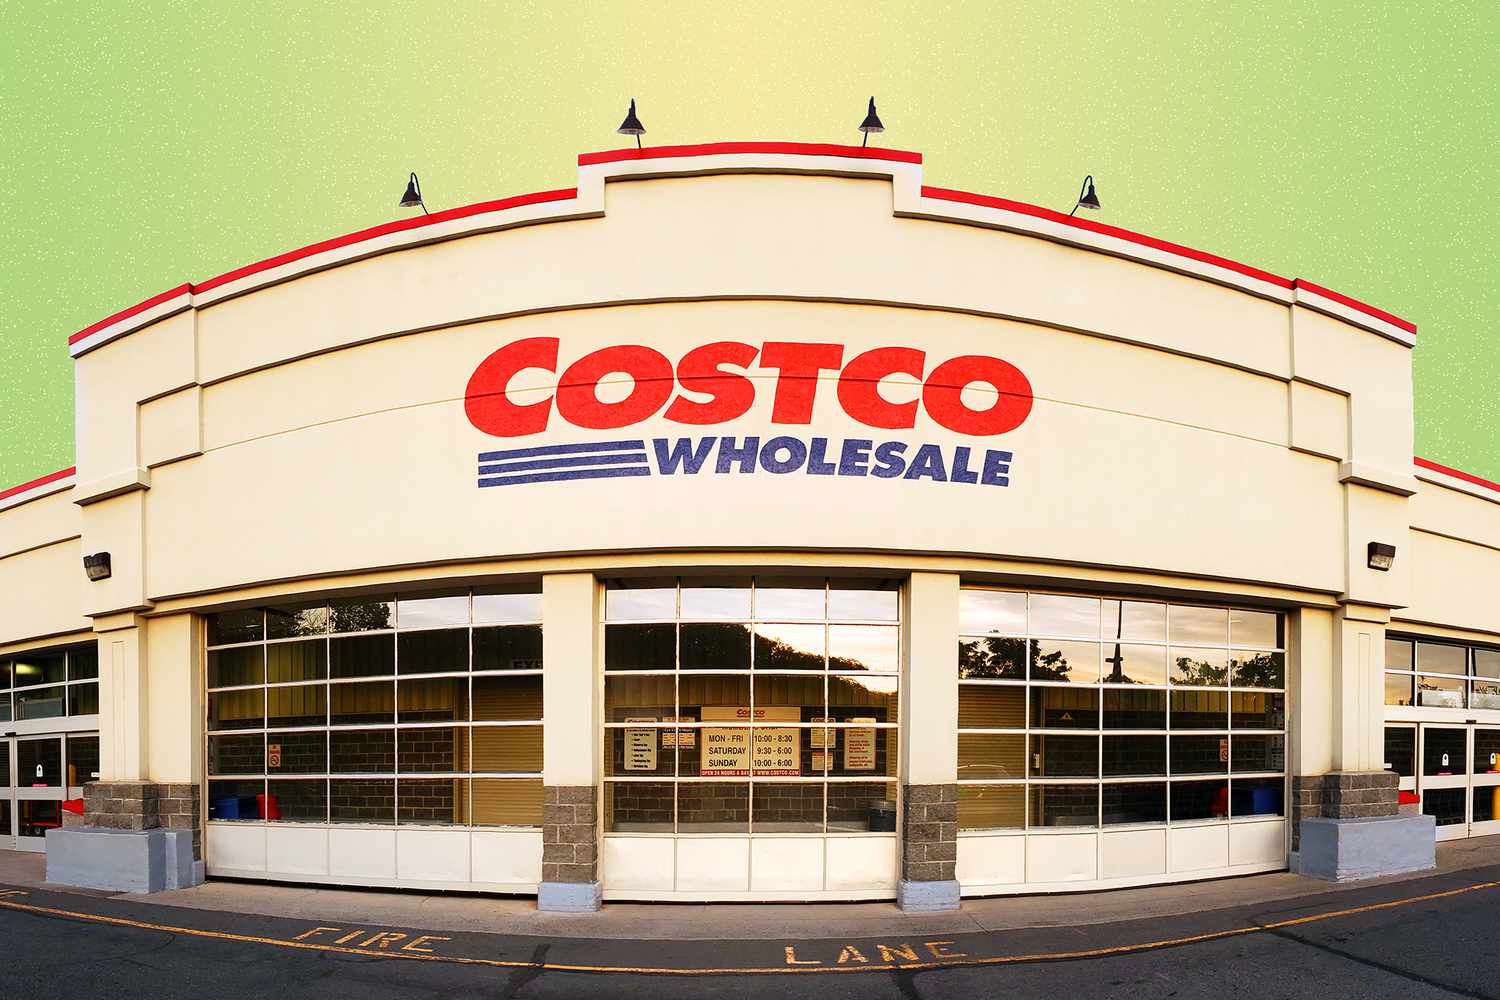 Panoramic view of Costco Wholesale store at sunset